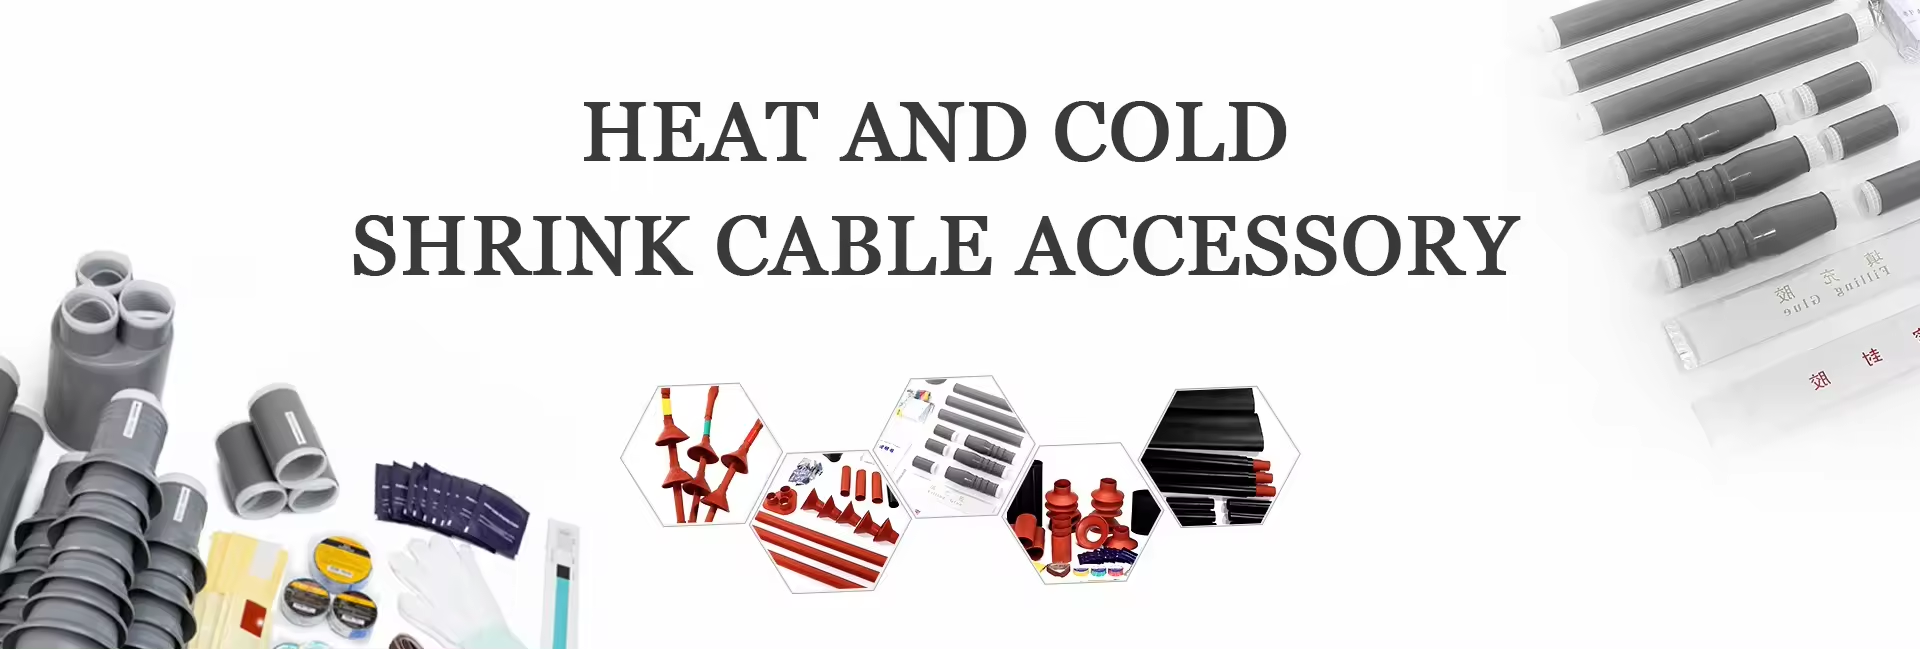 Heat and Cold Shrink Cable Accessory